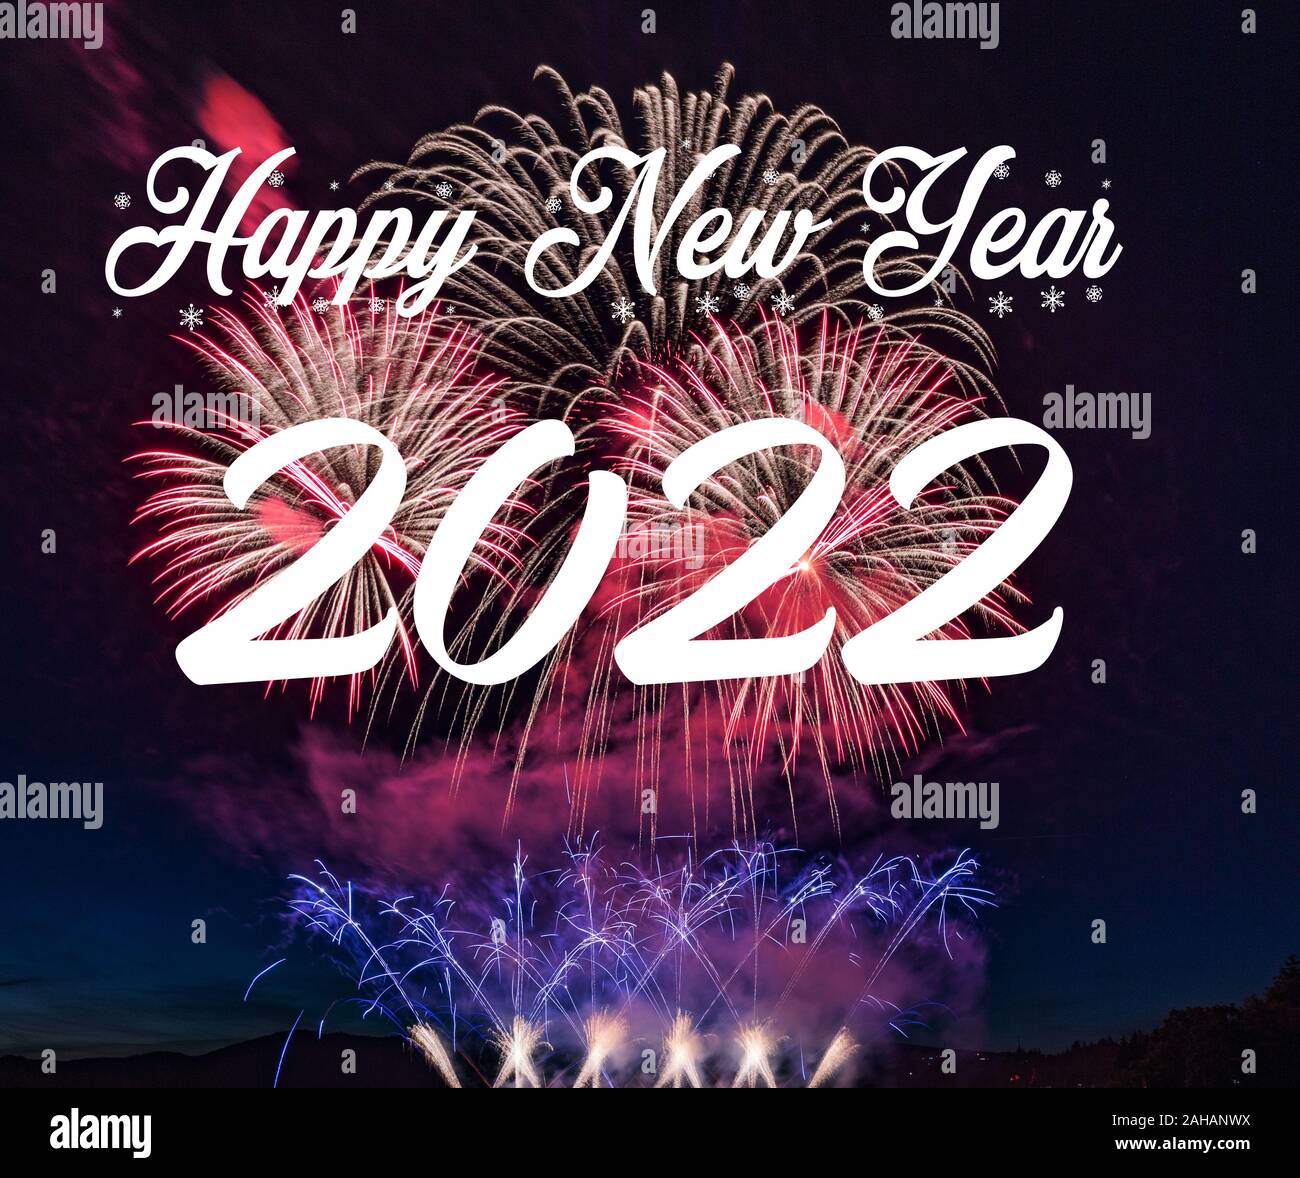 Happy New Year Eve 2022 Pictures Happy New Year 2022 With Fireworks Background Celebration New Year 2022 Stock Photo Alamy